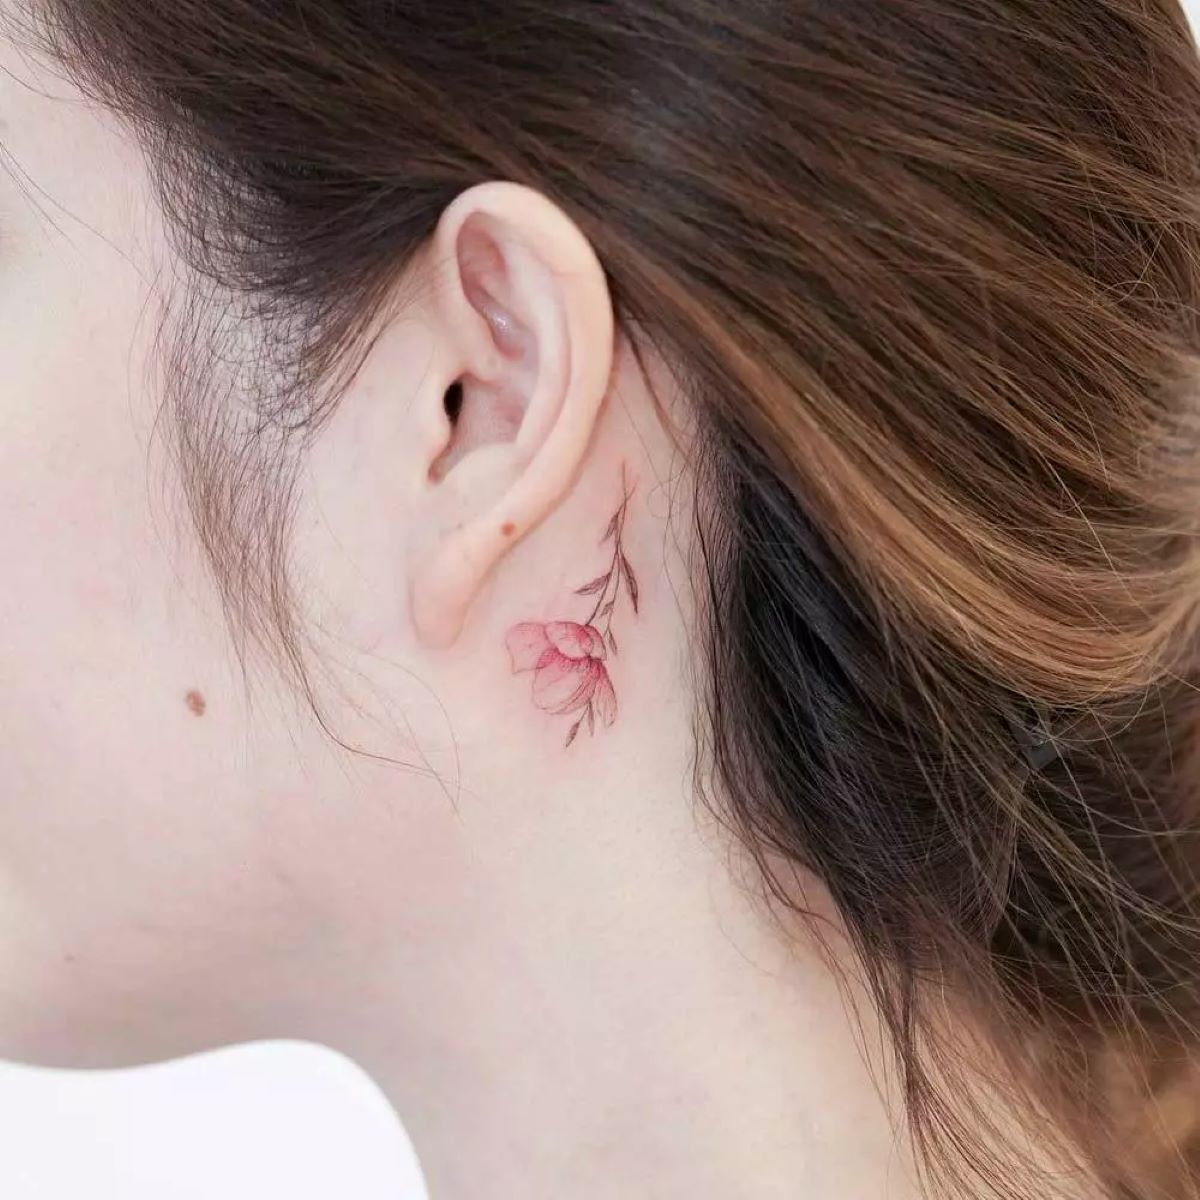 Discover The Surprising Impact Of Behind-the-Ear Tattoos On Professional Image